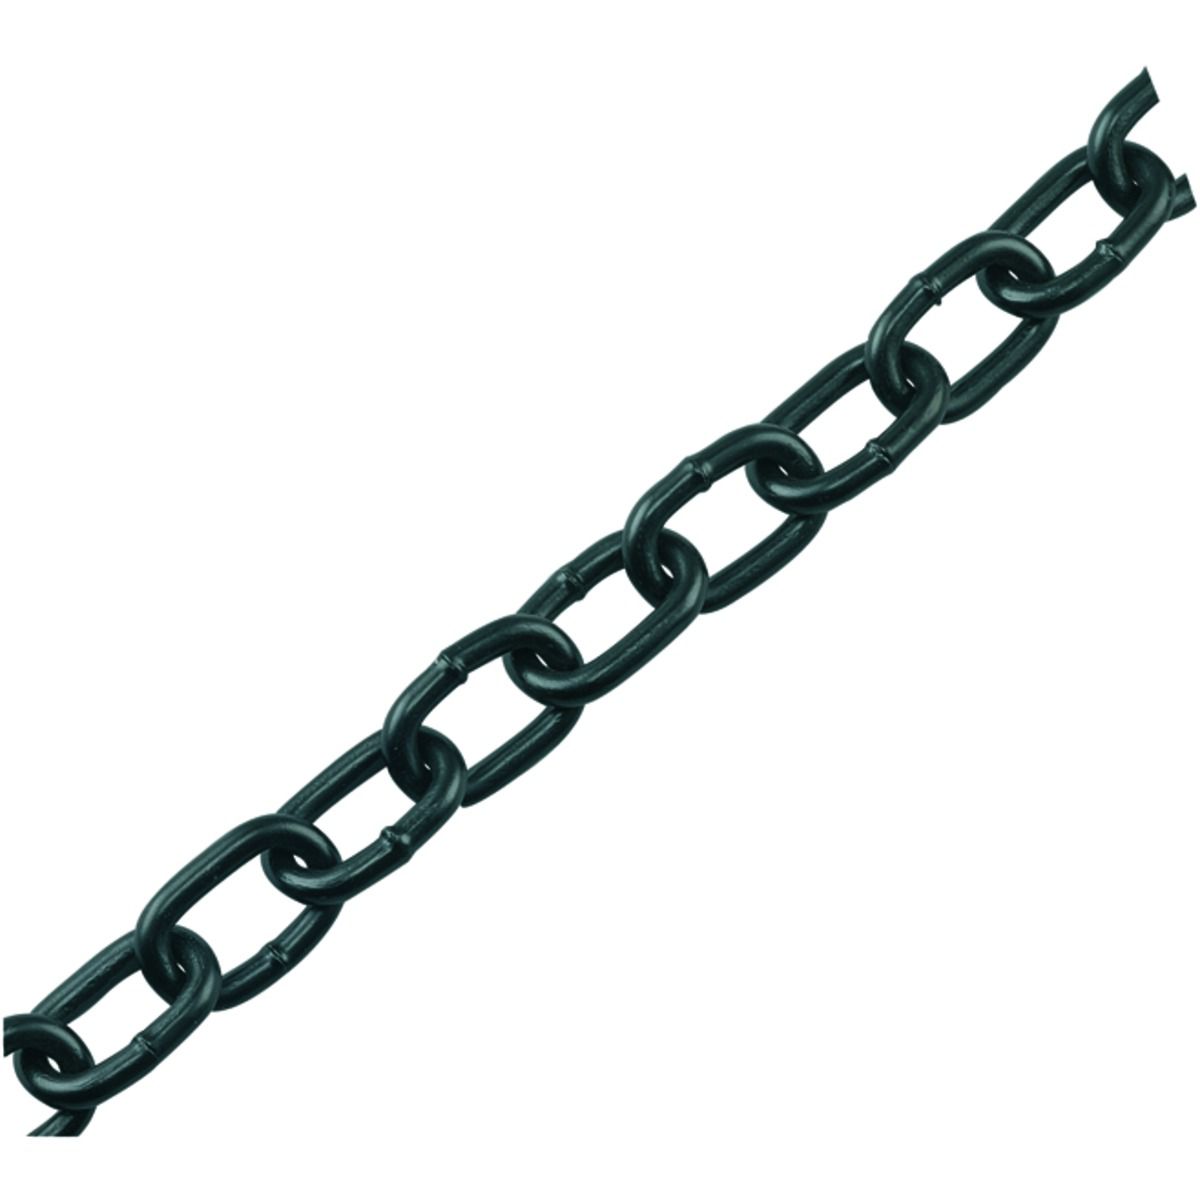 Image of Wickes Black Zinc Plated Steel Welded Chain - 5 x 21mm x 2m